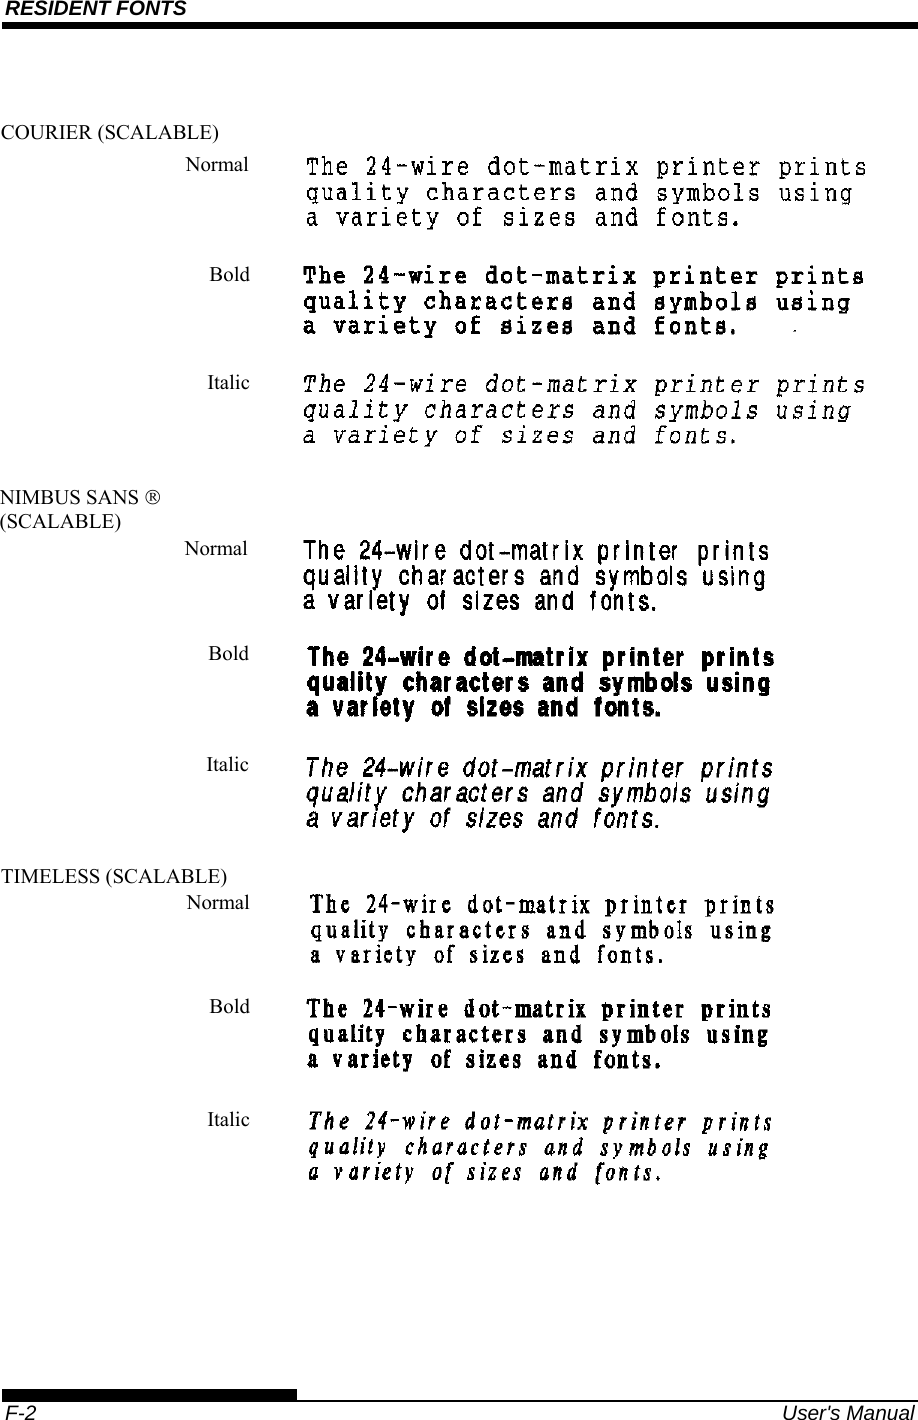 RESIDENT FONTS    F-2  User&apos;s Manual     COURIER (SCALABLE) Normal Bold Italic Normal Bold Italic Normal Bold Italic NIMBUS SANS ® (SCALABLE) TIMELESS (SCALABLE) 